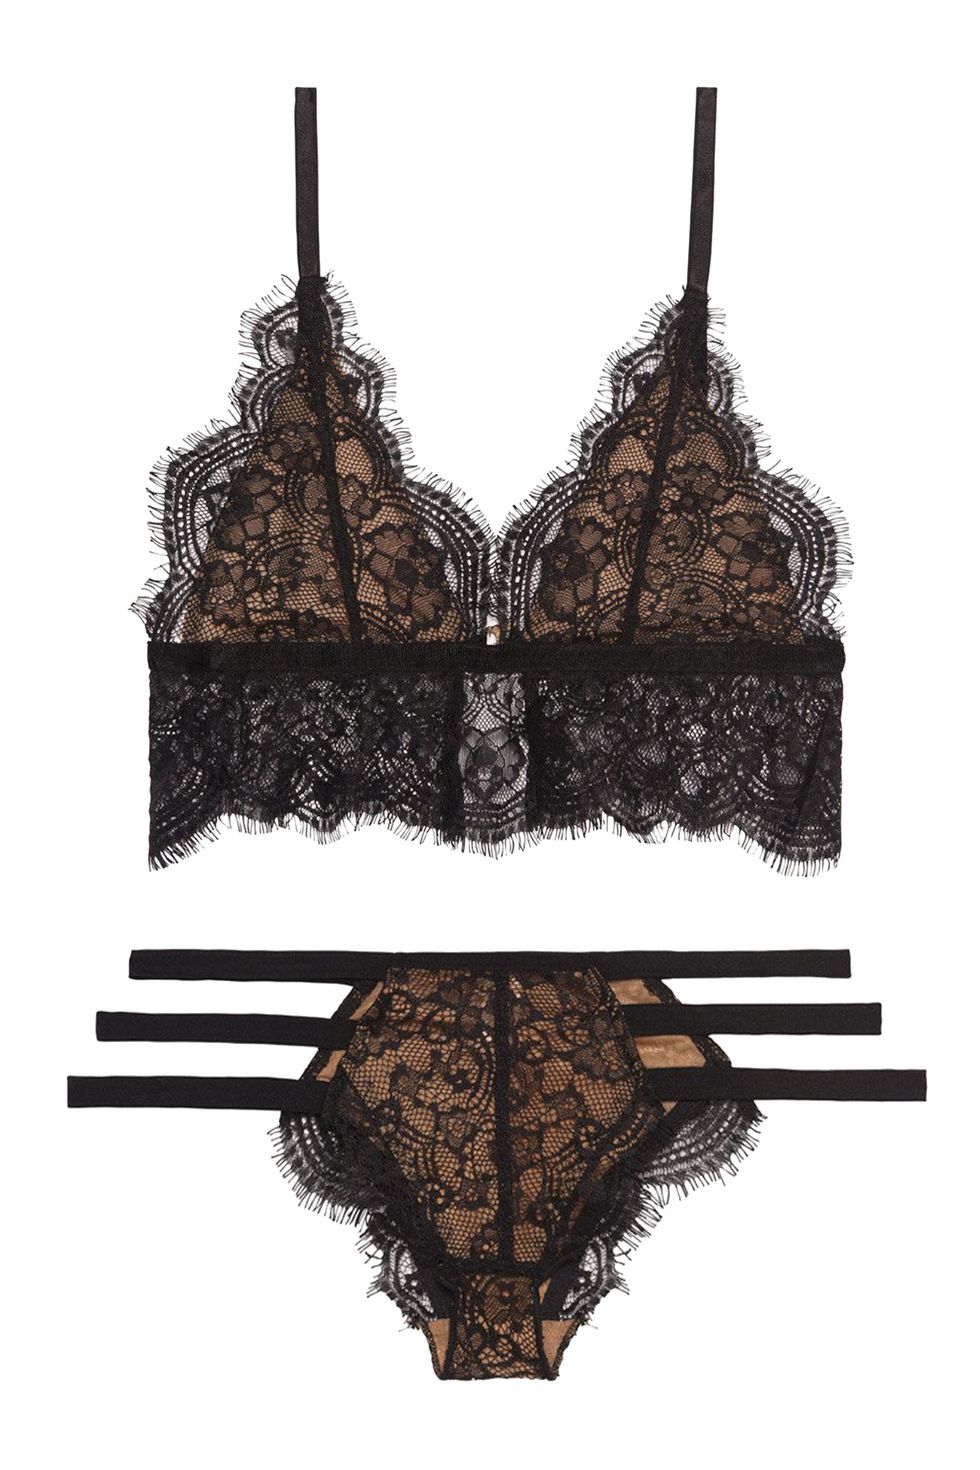 Valentine's Day Special: Embrace Romance with FORLEST® Black Bras